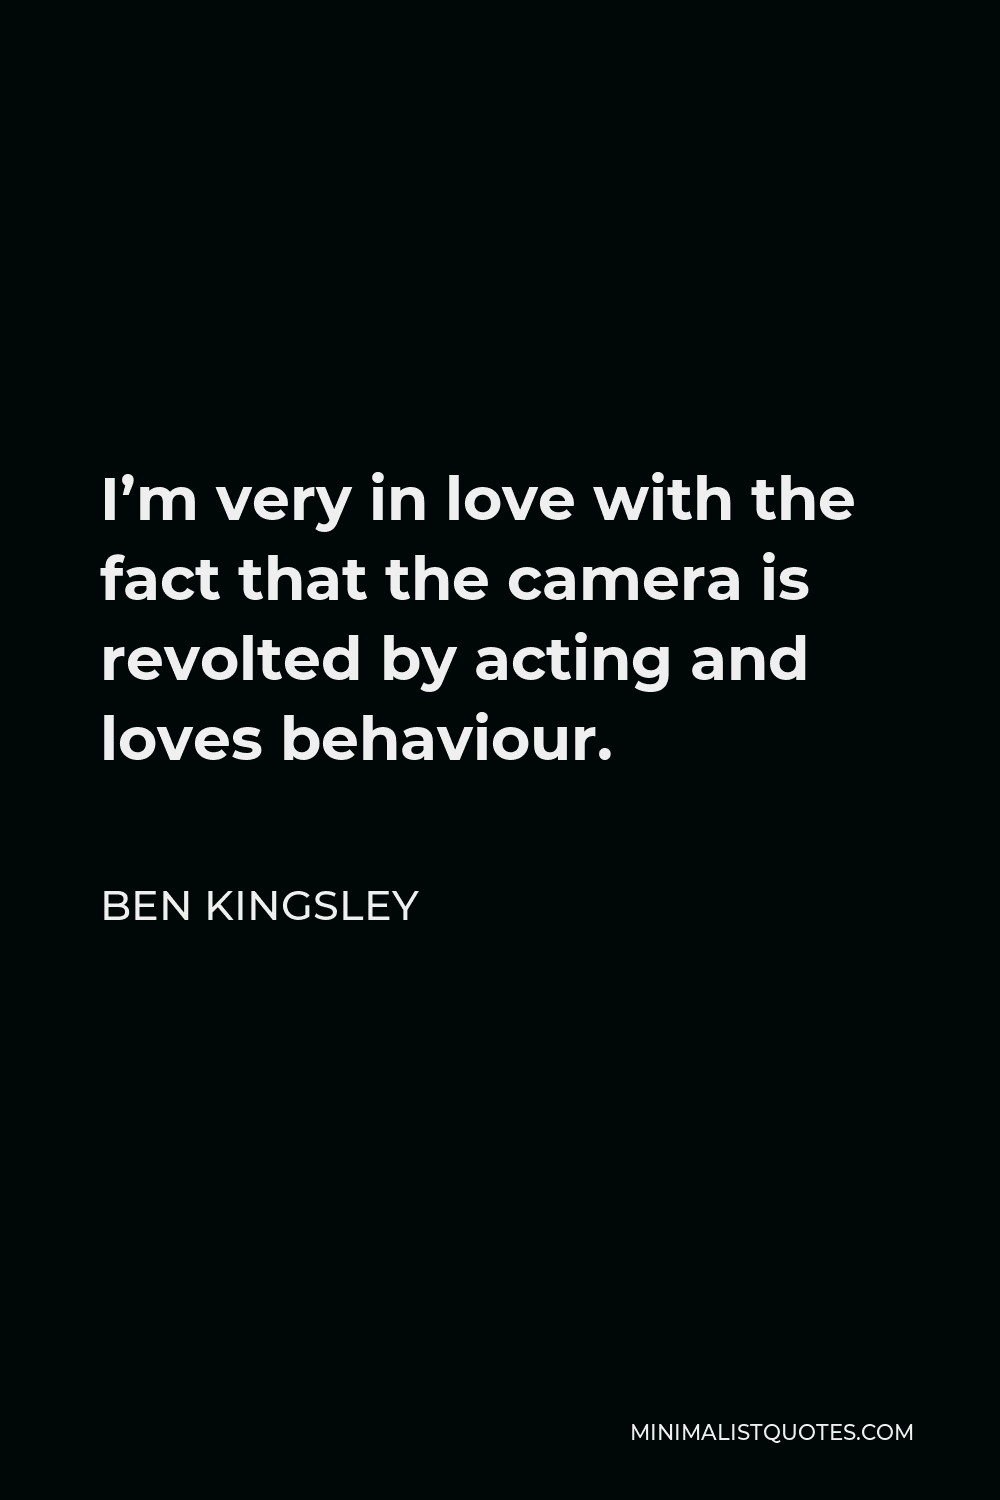 Ben Kingsley Quote - I’m very in love with the fact that the camera is revolted by acting and loves behaviour.